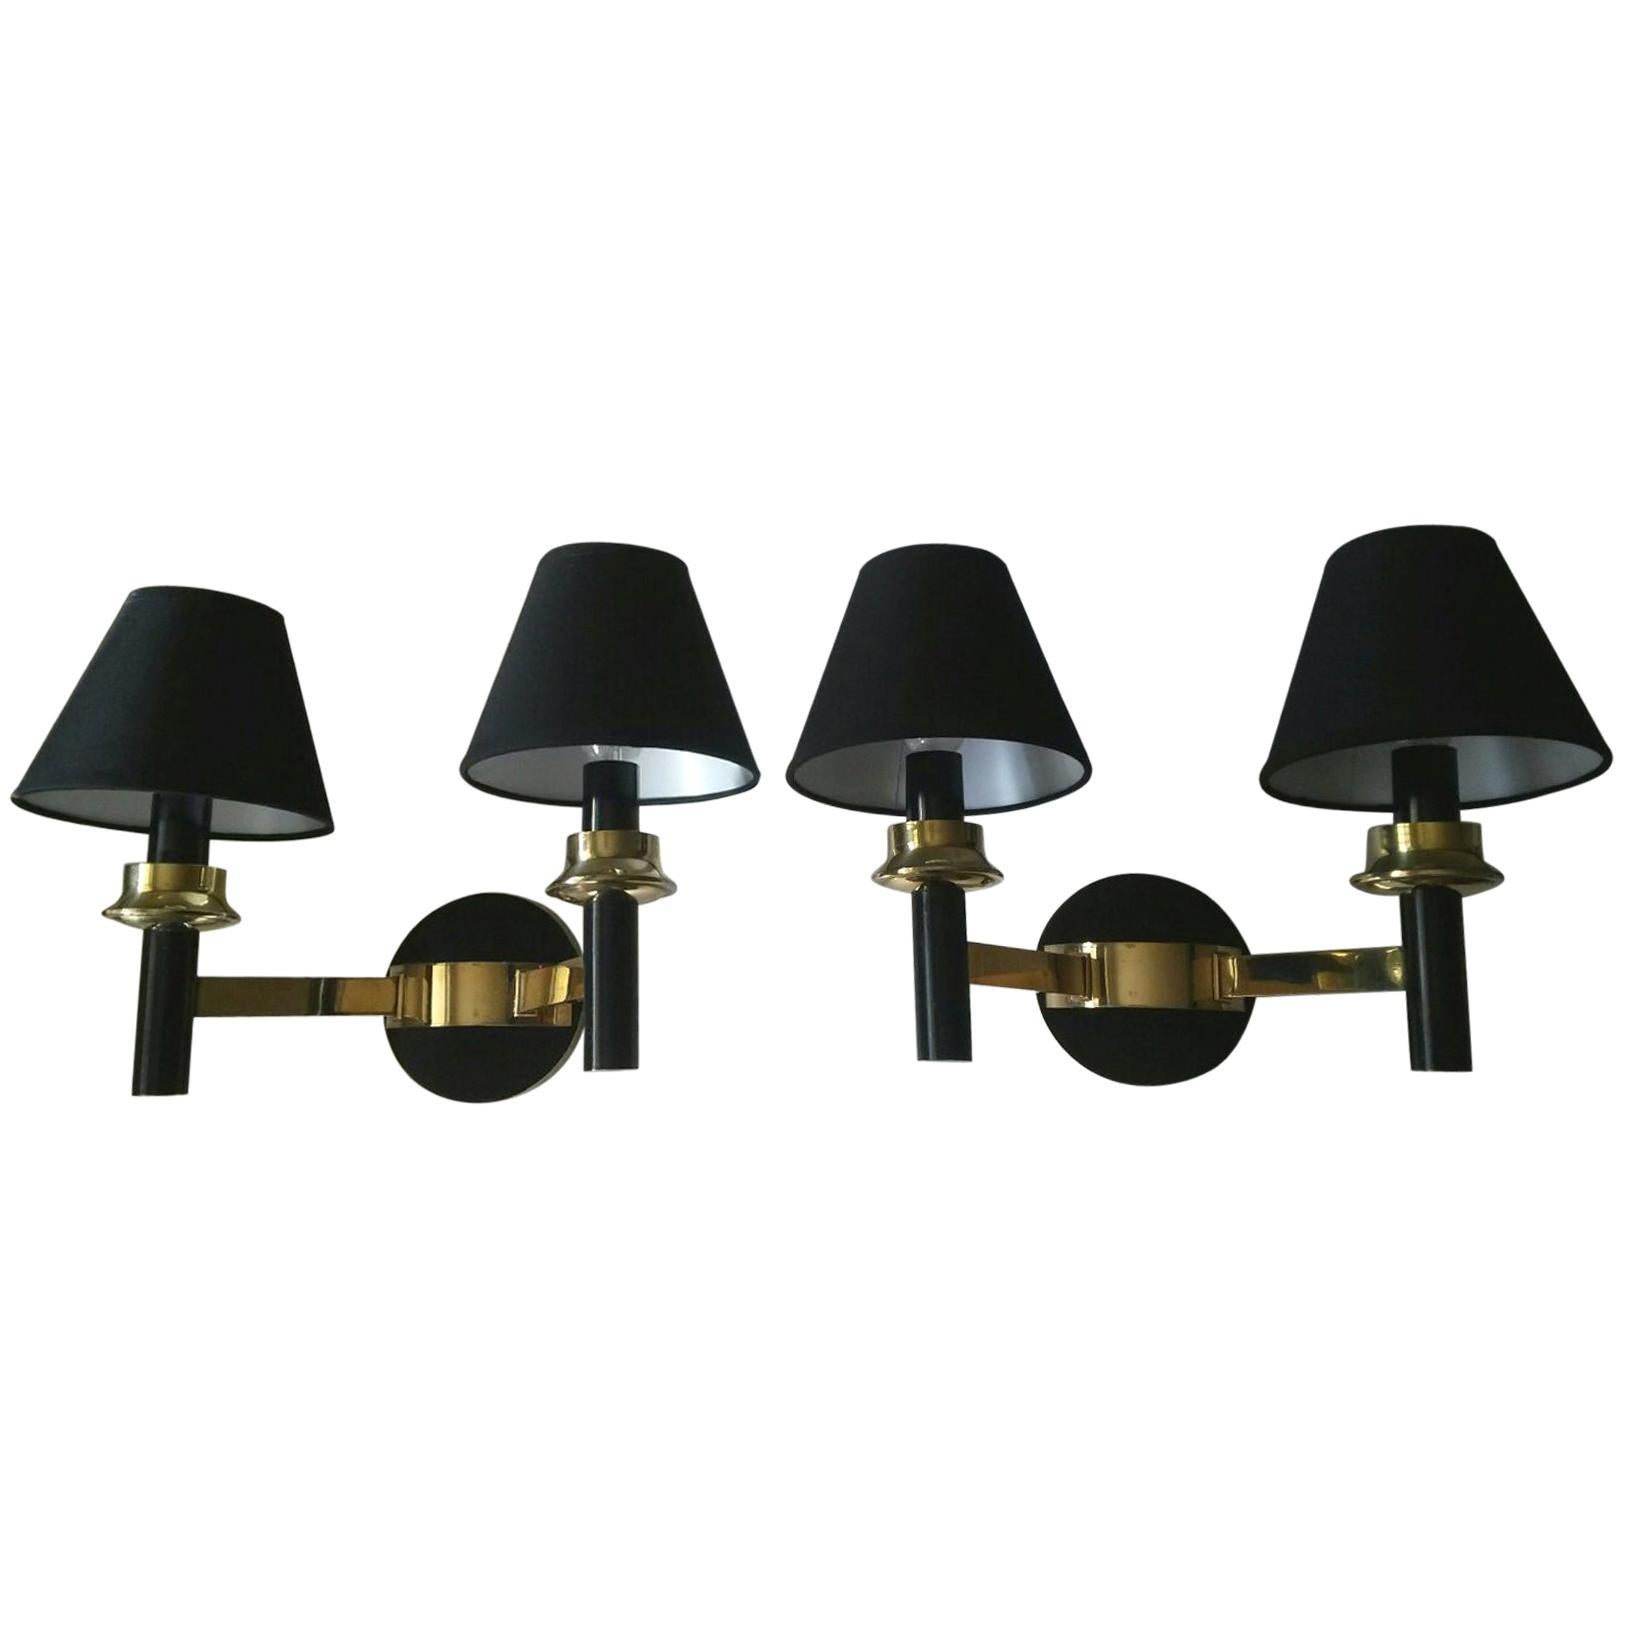 Pair of Two-Arm Neoclassical French Style Jacques Adnet Sconces, France, 1950s For Sale